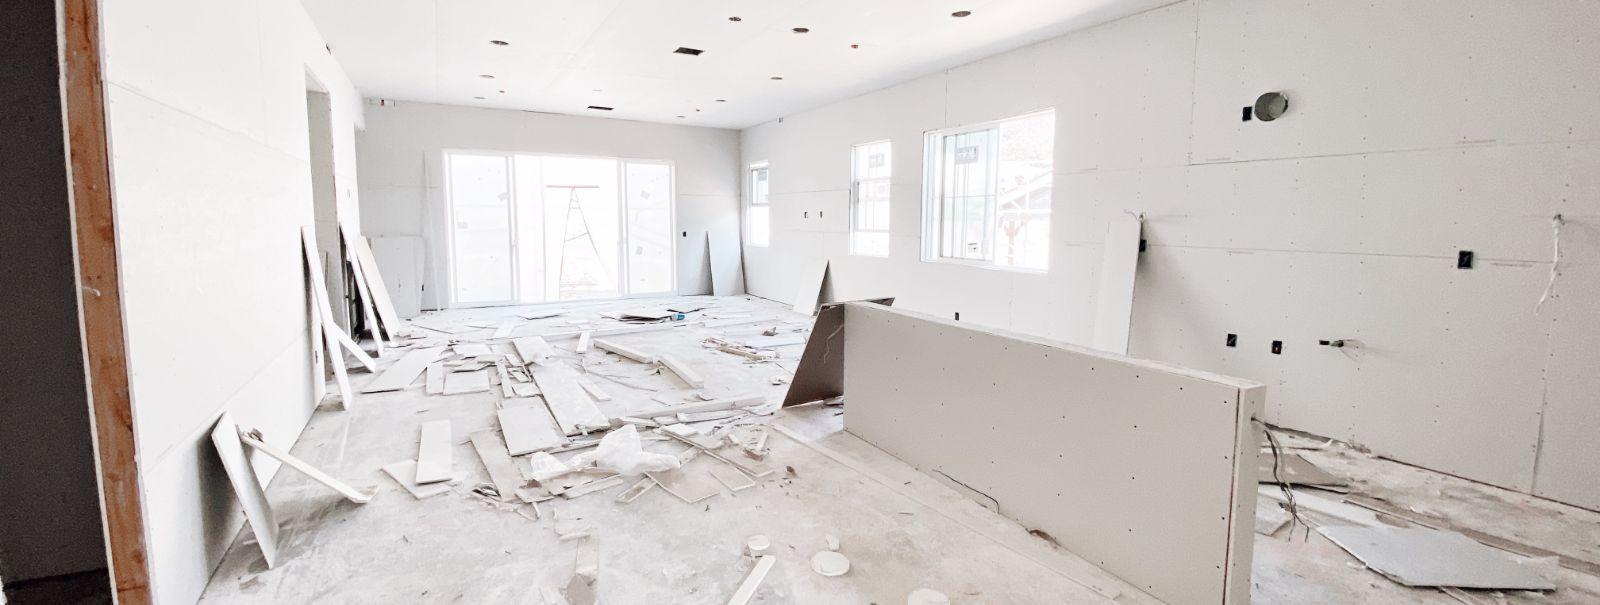 After the dust settles from a renovation or repair project, the task of restoring your space to its pristine condition begins. Post-repair cleaning is not just 